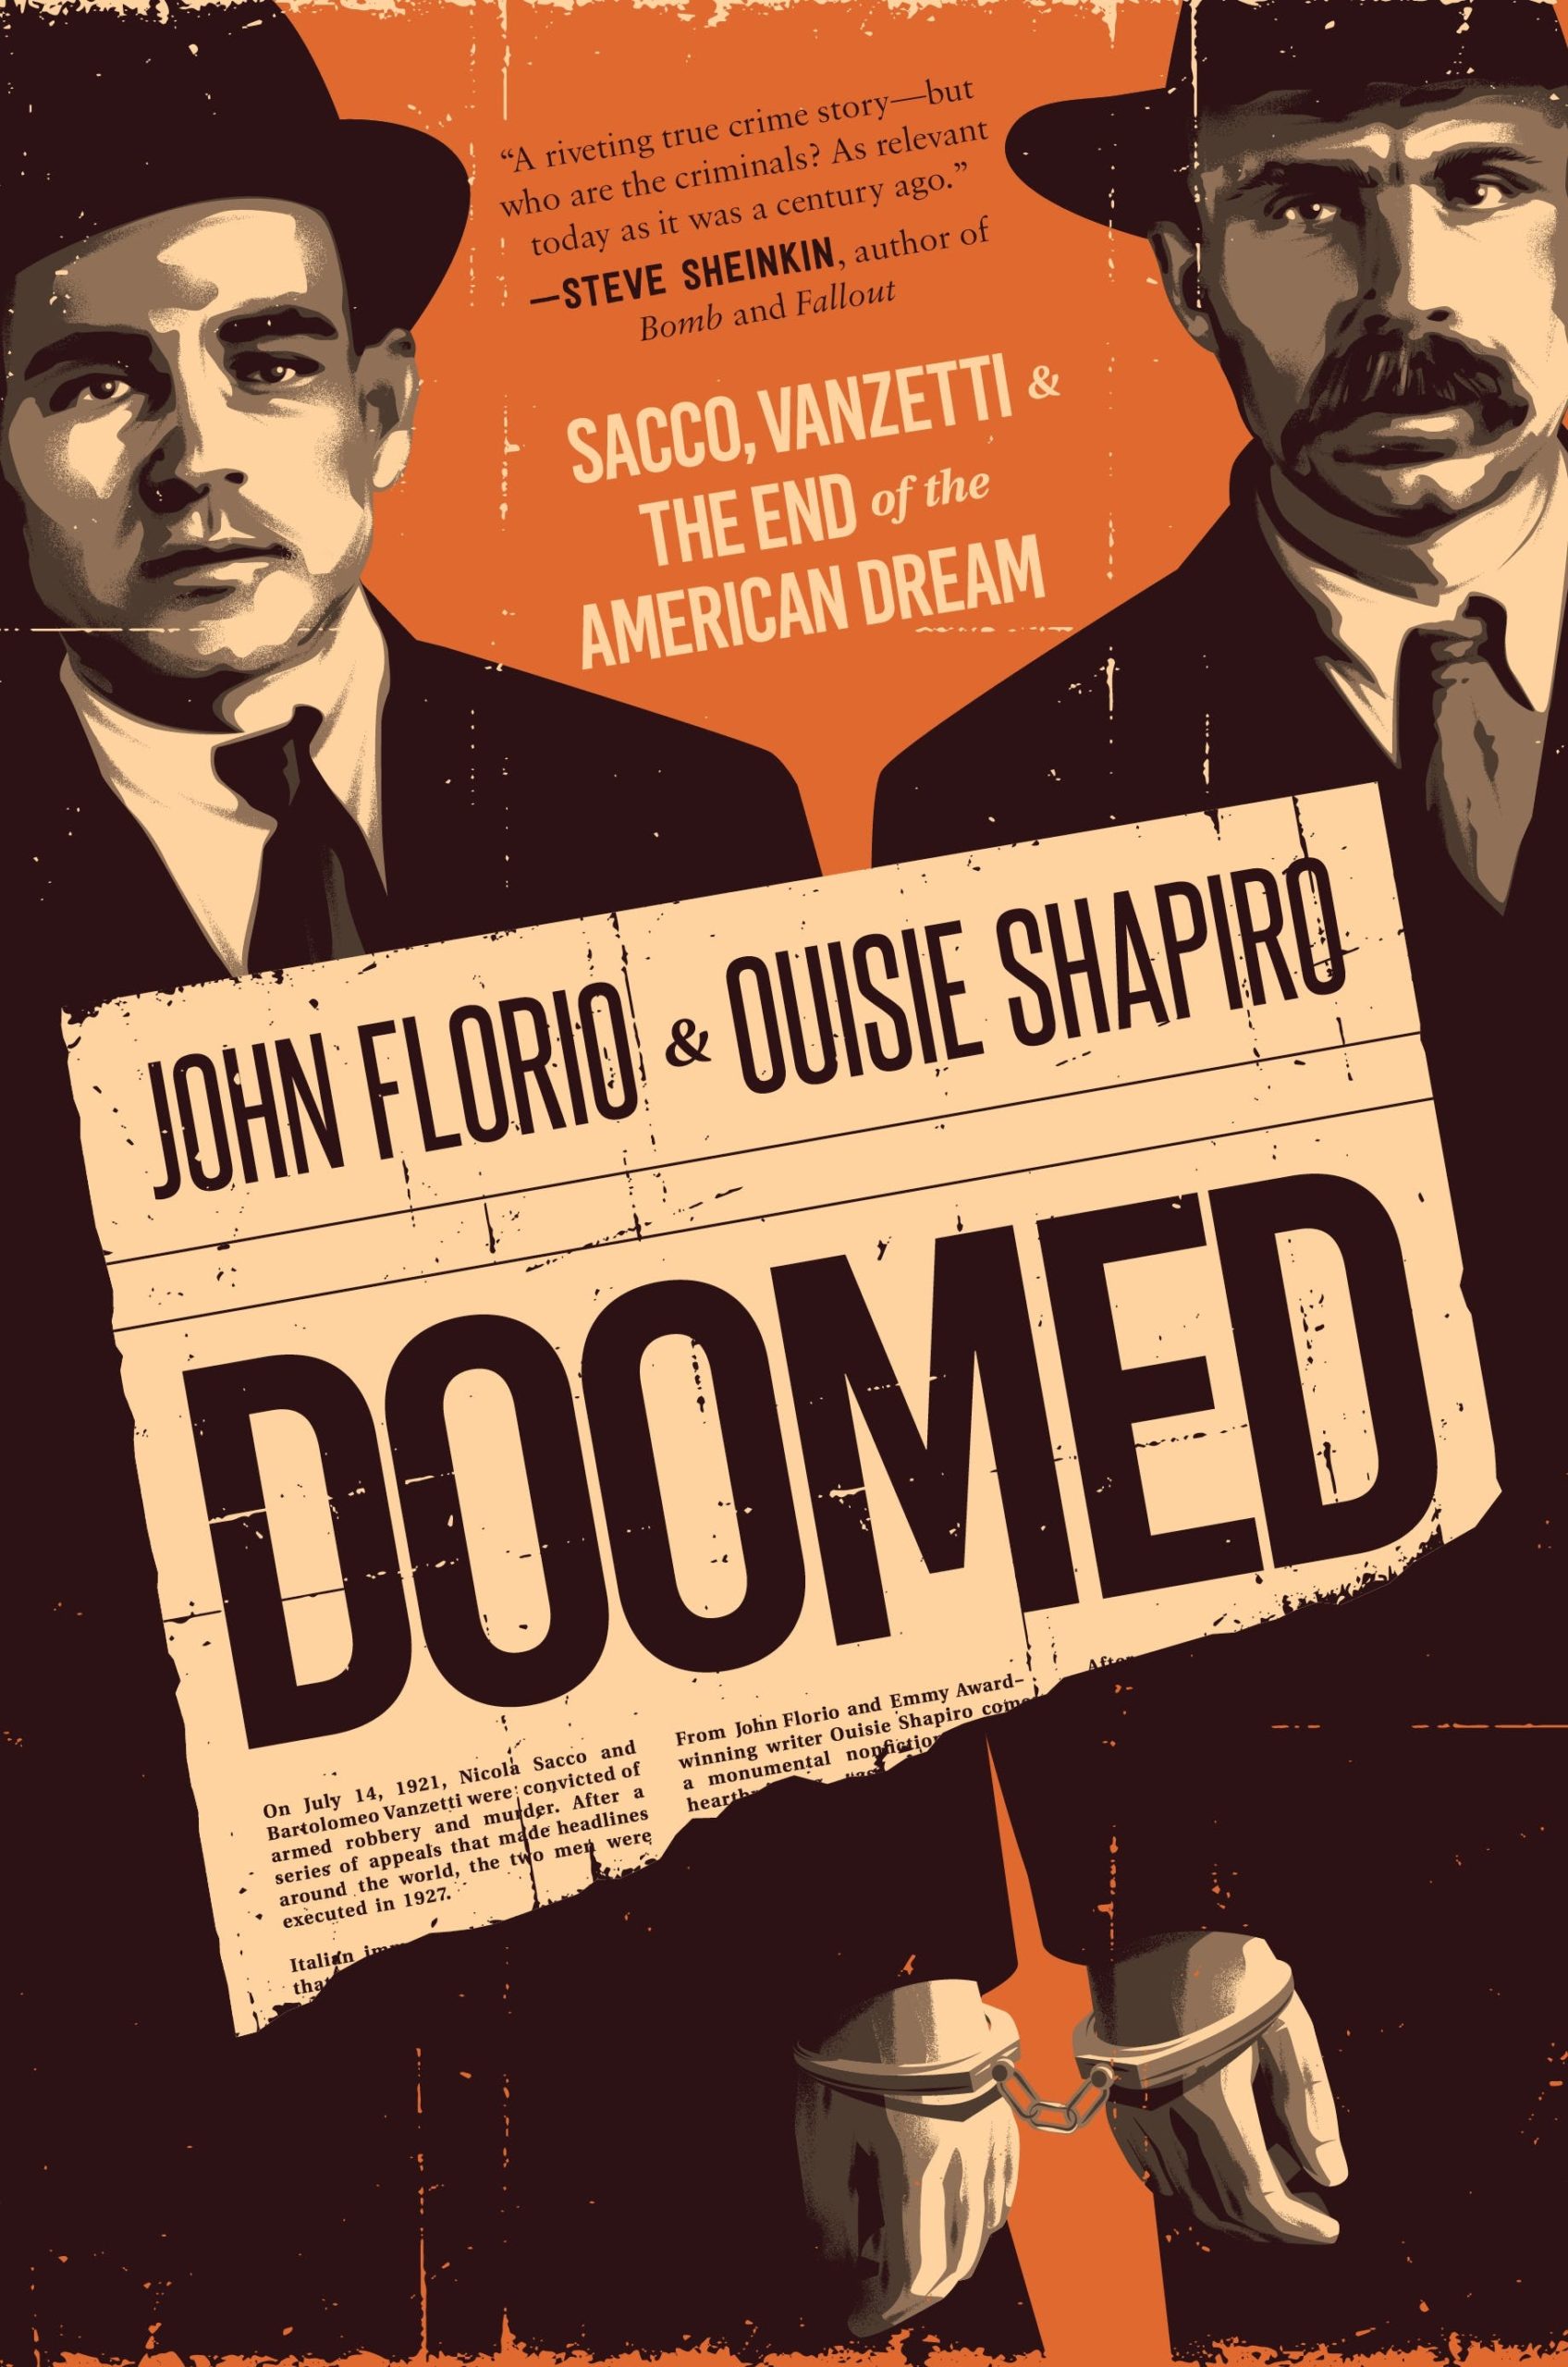 Doomed: Sacco, Vanzetti & the End of the American Dream by John Florio